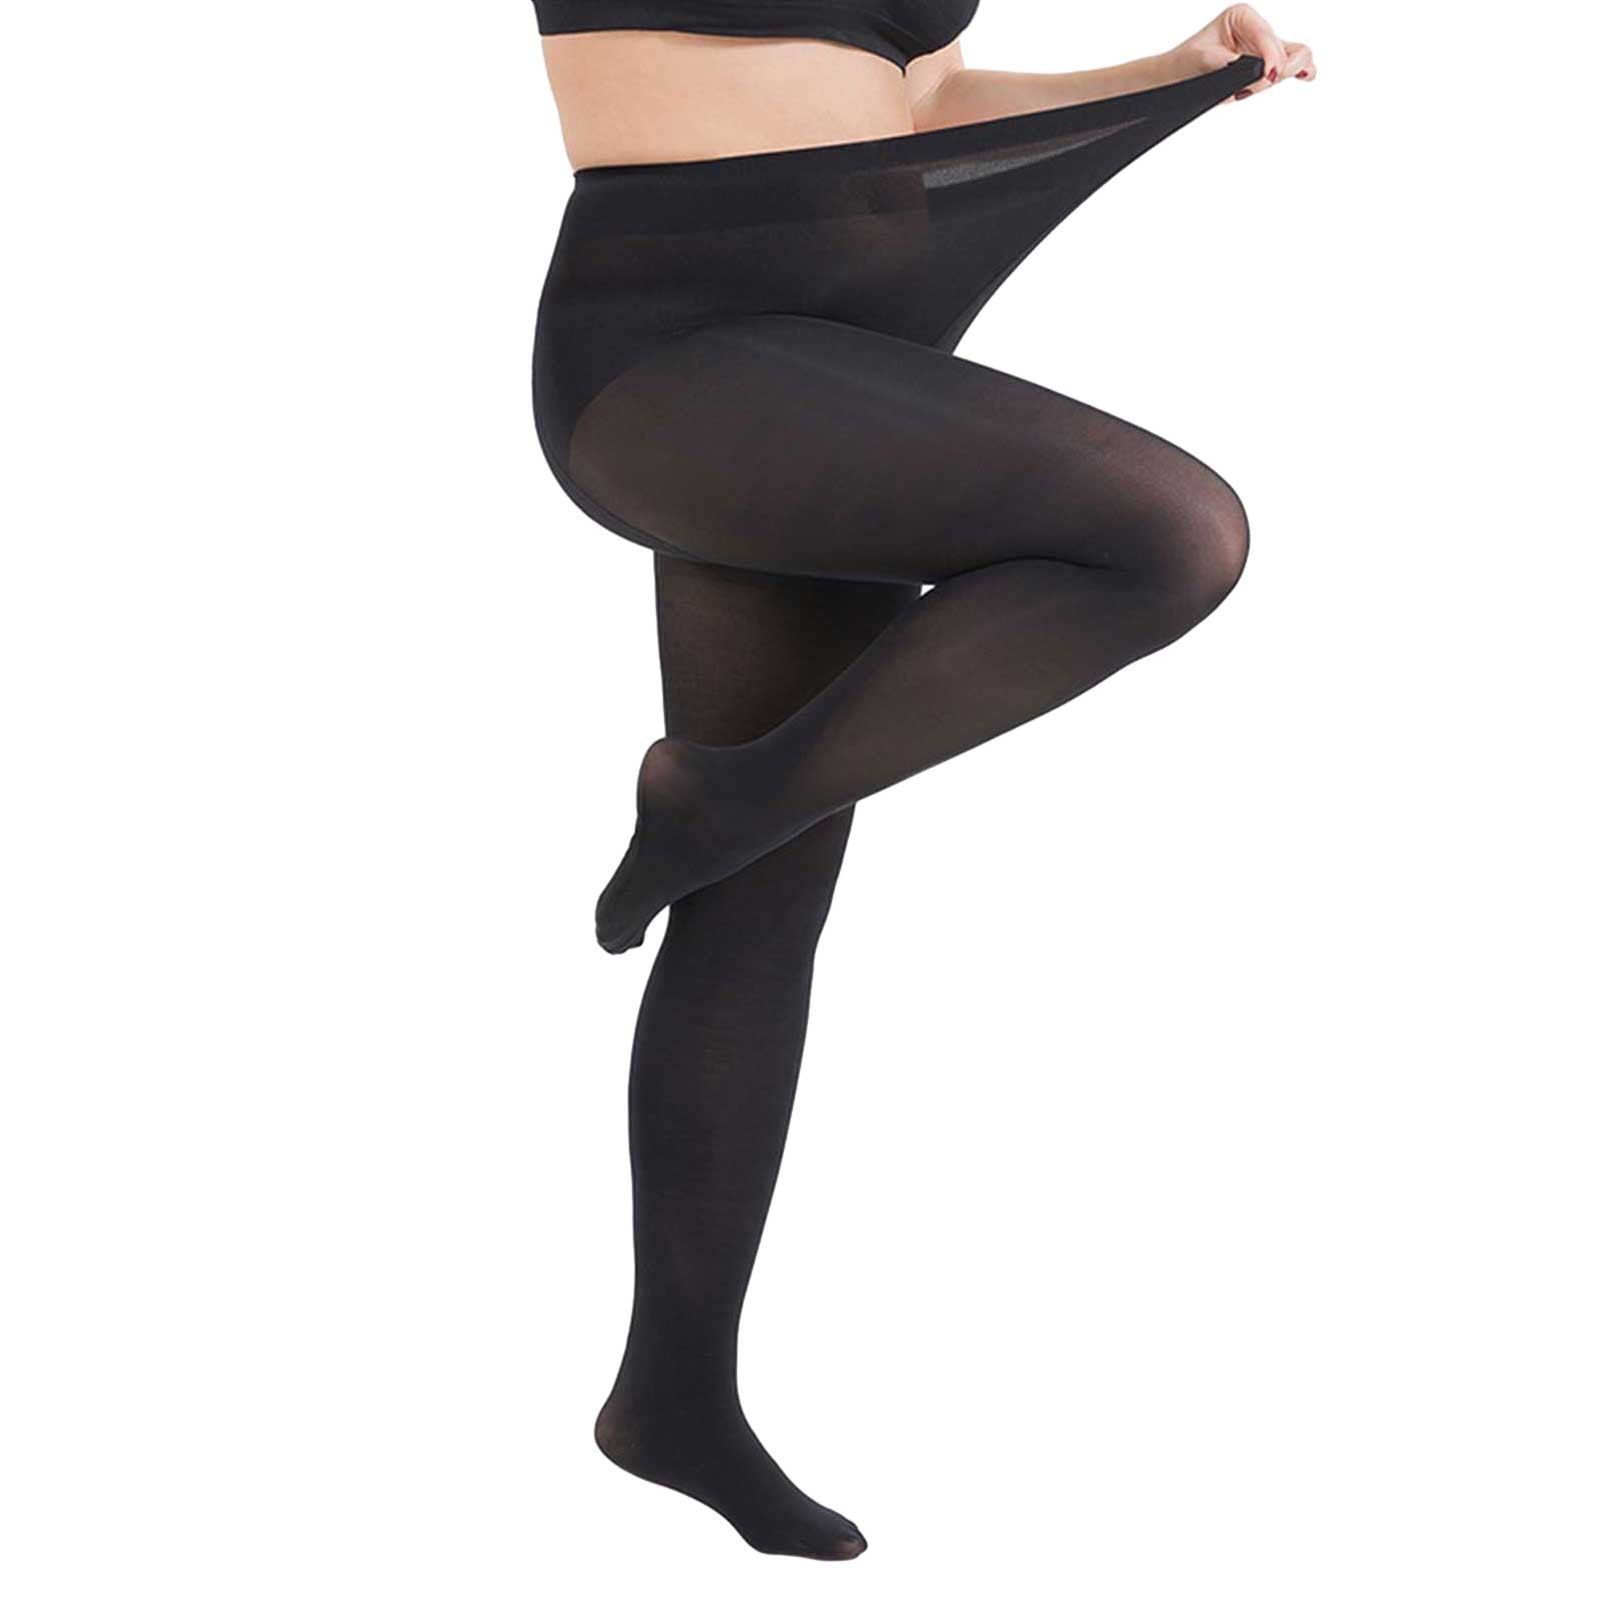 Yoga Pants For Women Solid Breathable Elastic Crotch Plus Size ...